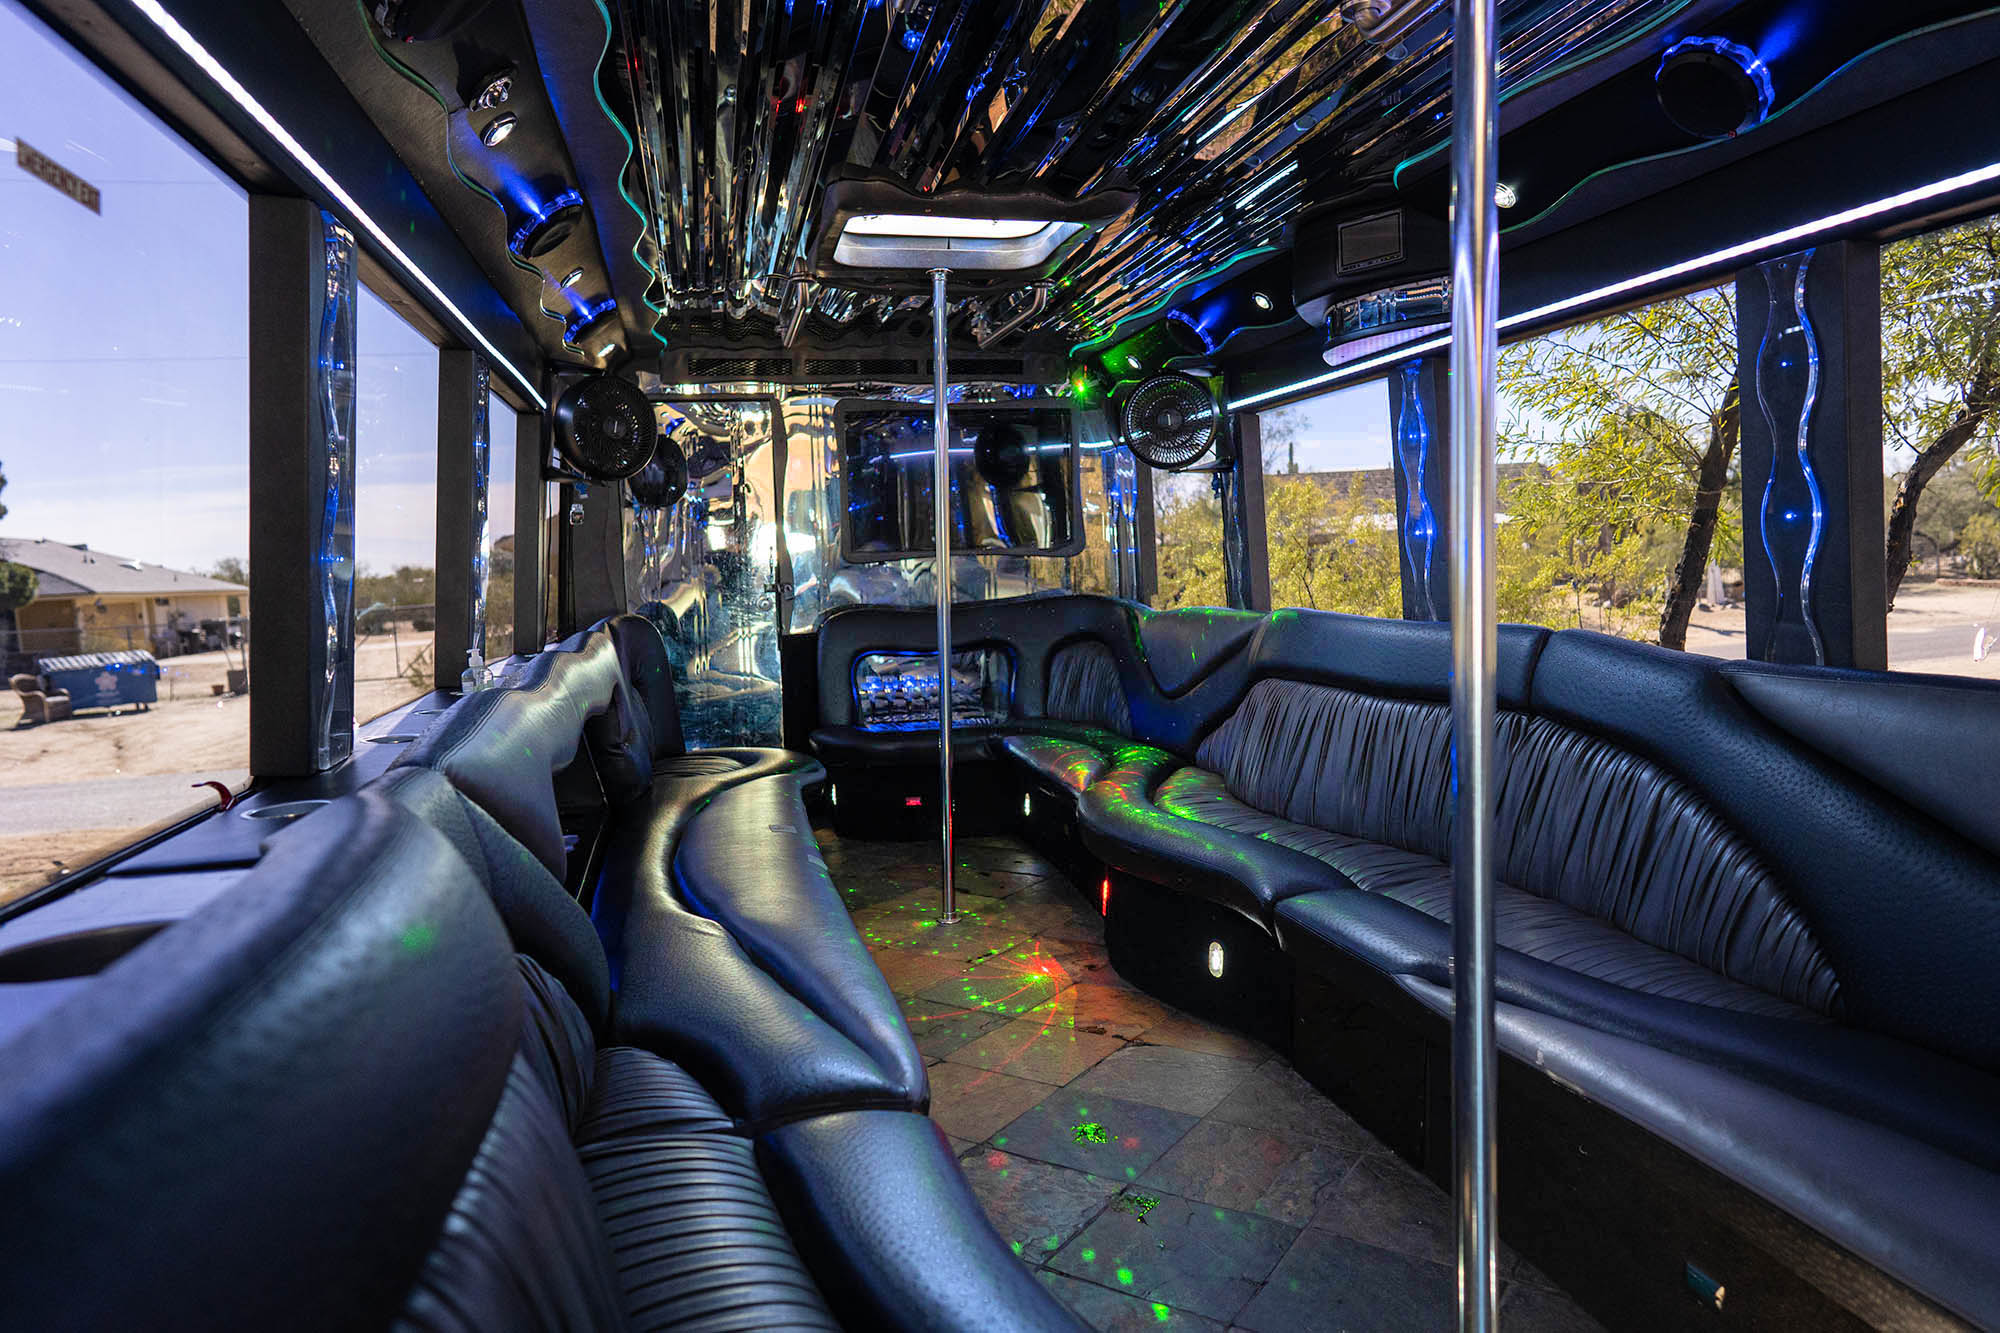 Party Bus Rental with Stripper poles